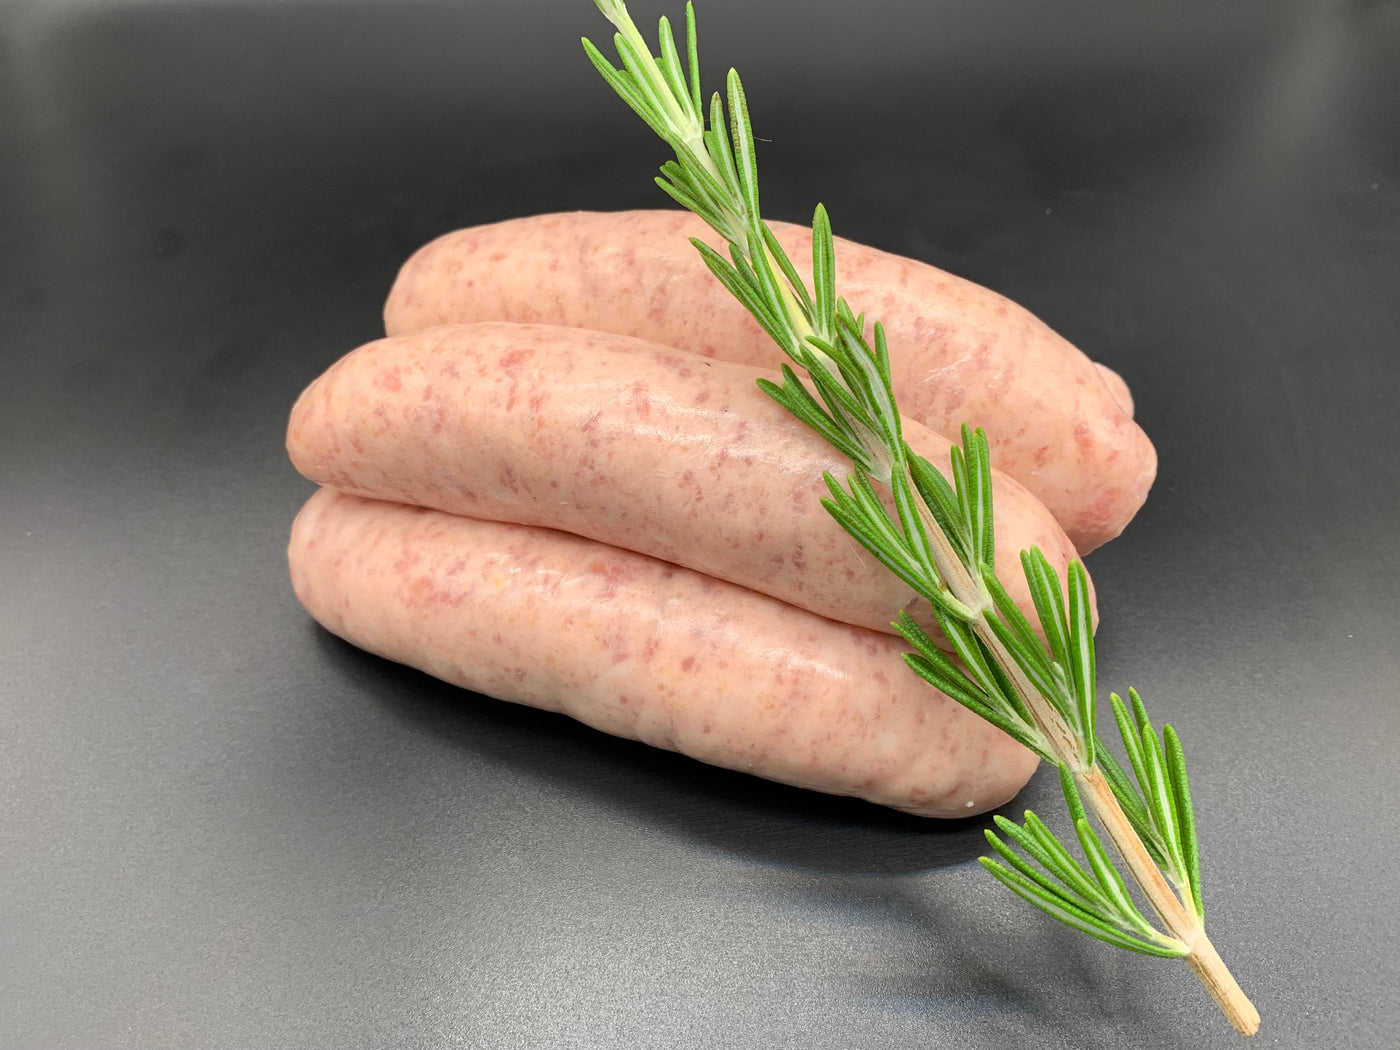 *LIMITED* 3 packs of Becky's Best Sausages for £12.99